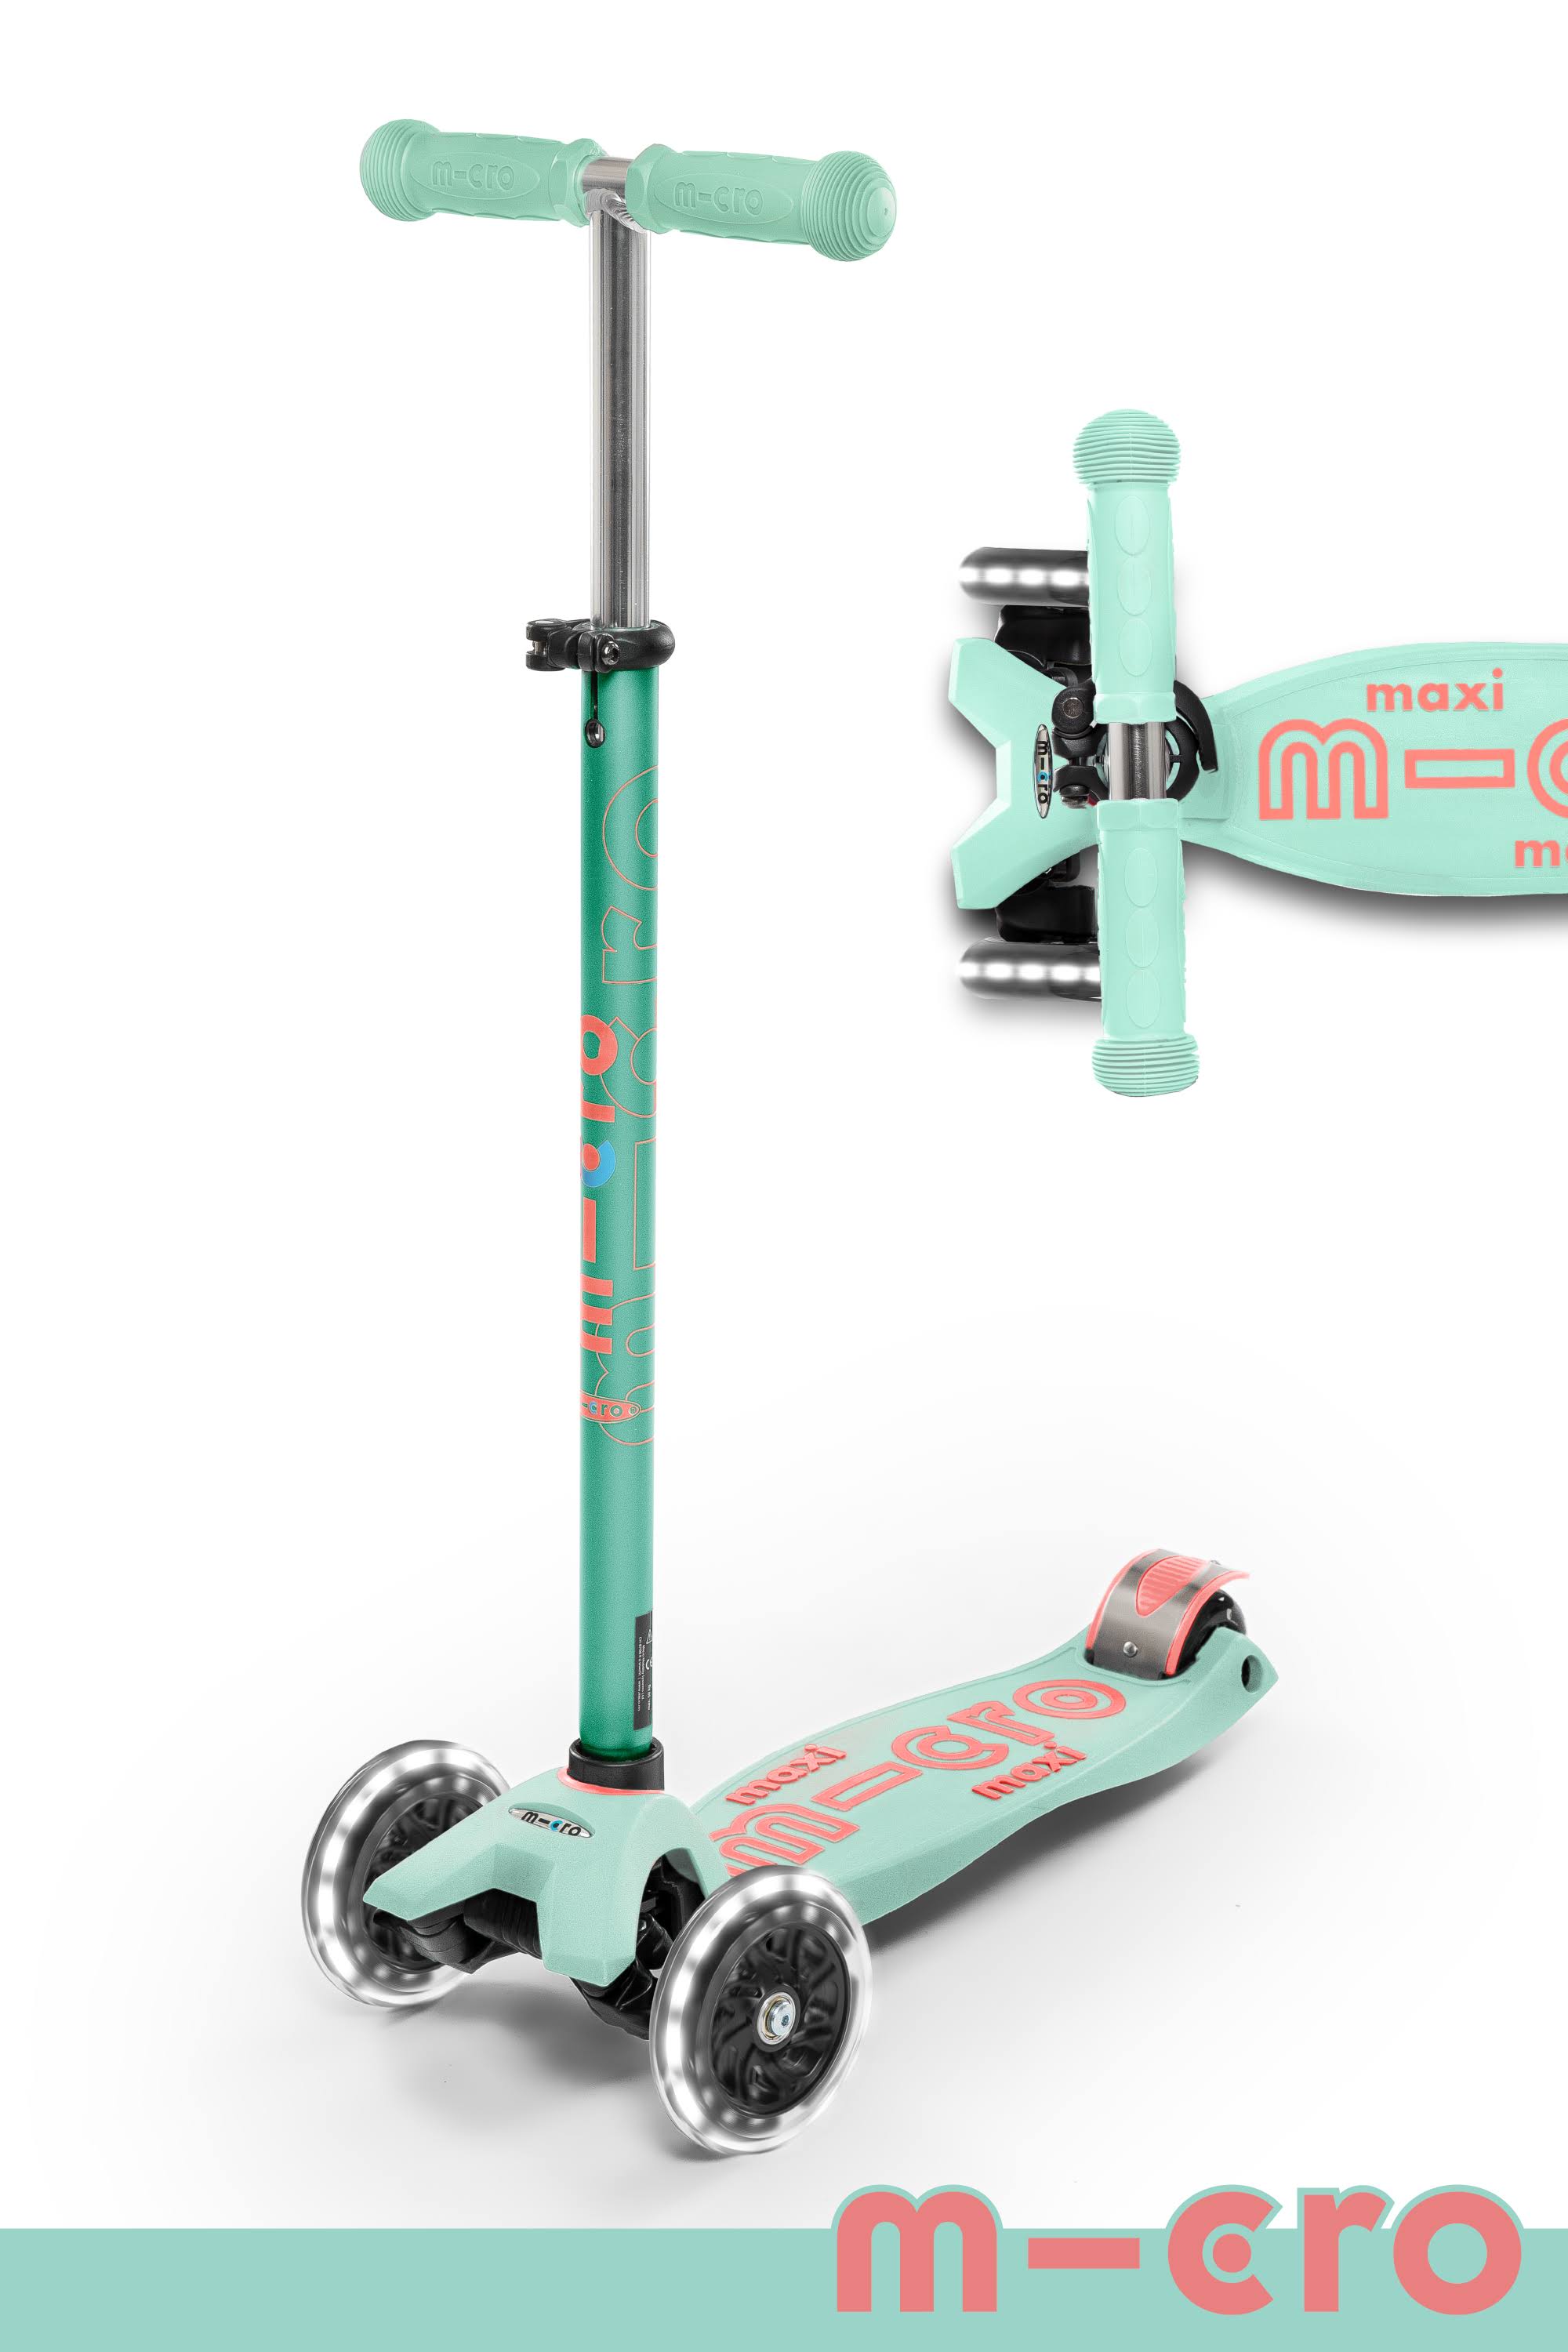 Maxi Micro Deluxe LED Scooter Mint